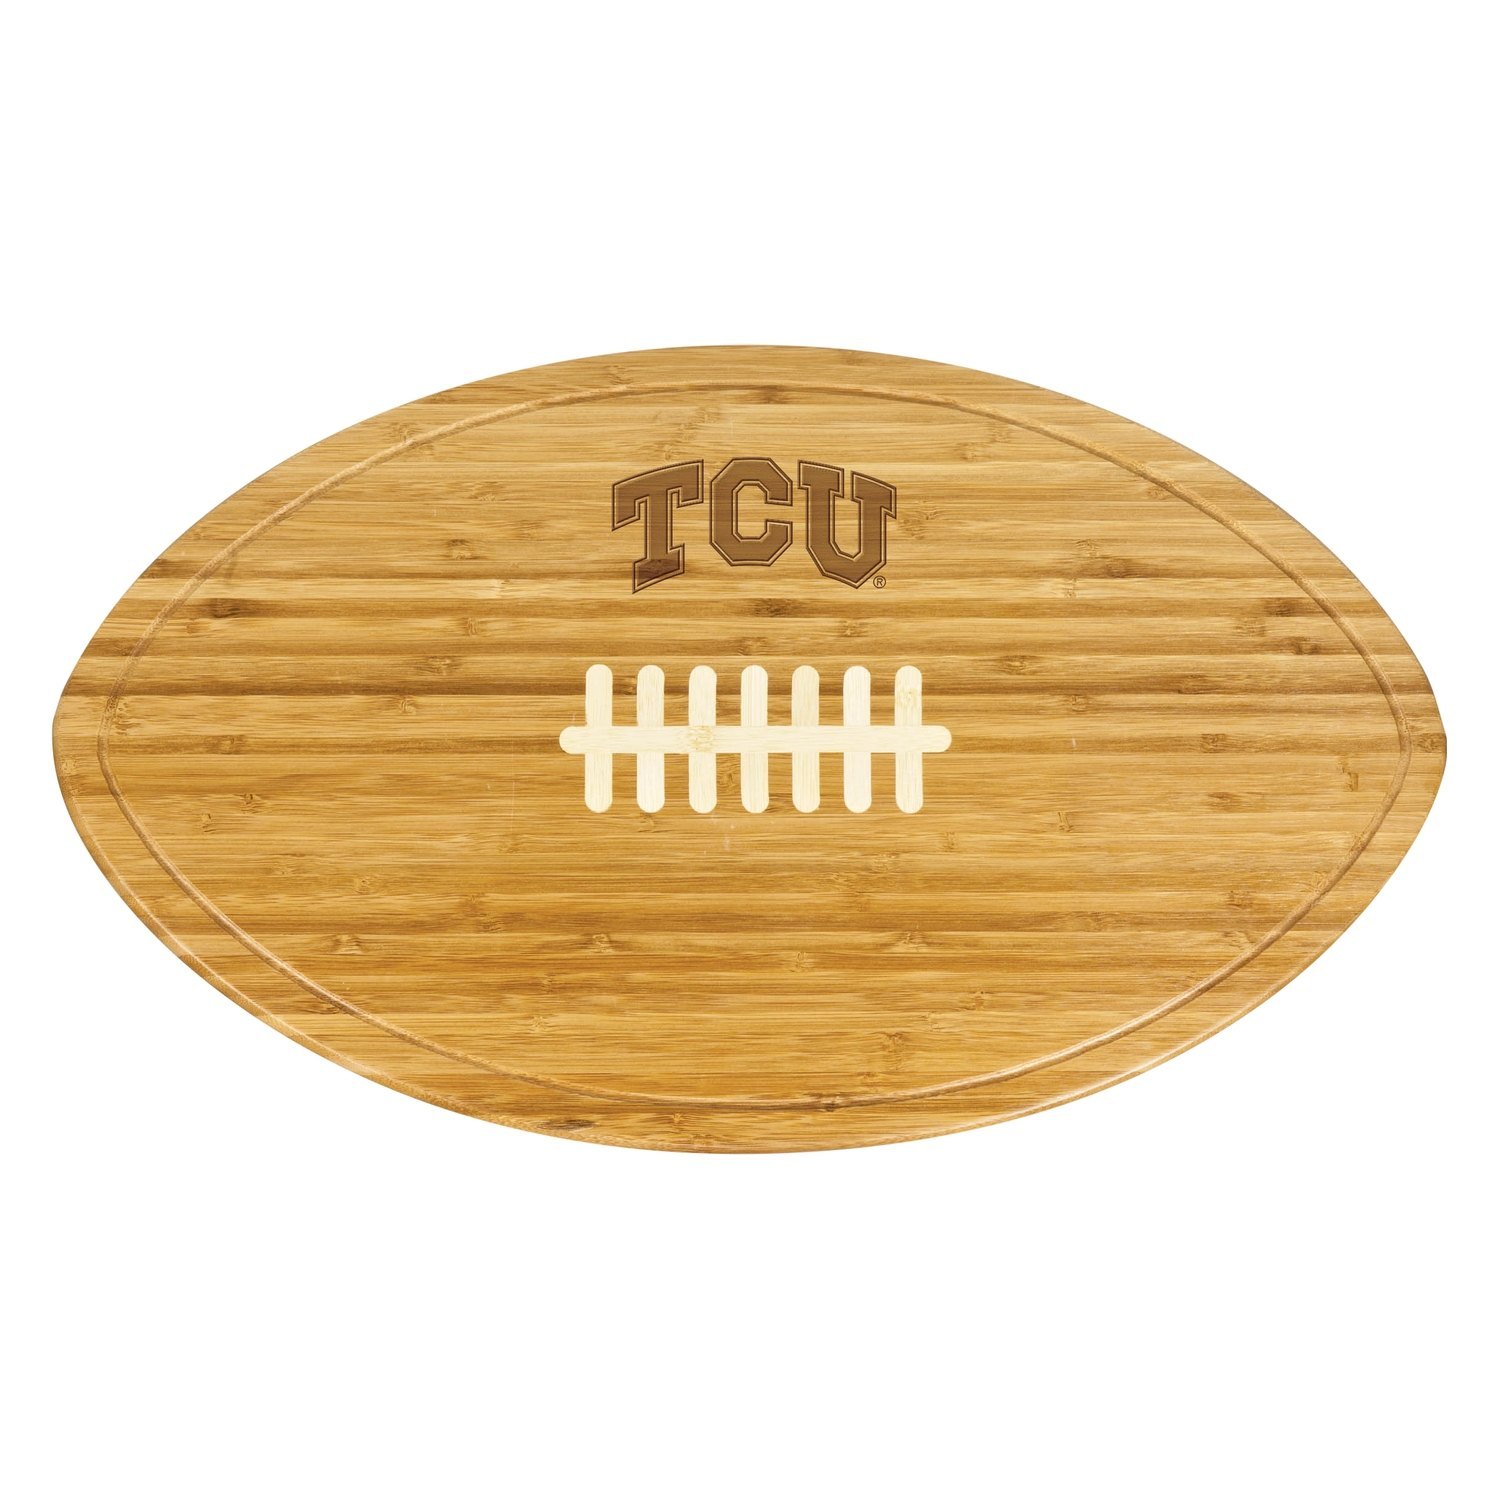 NCAA TCU Horned Frog Kickoff Cheese Board Picnic Time 908-00-505-843-0 